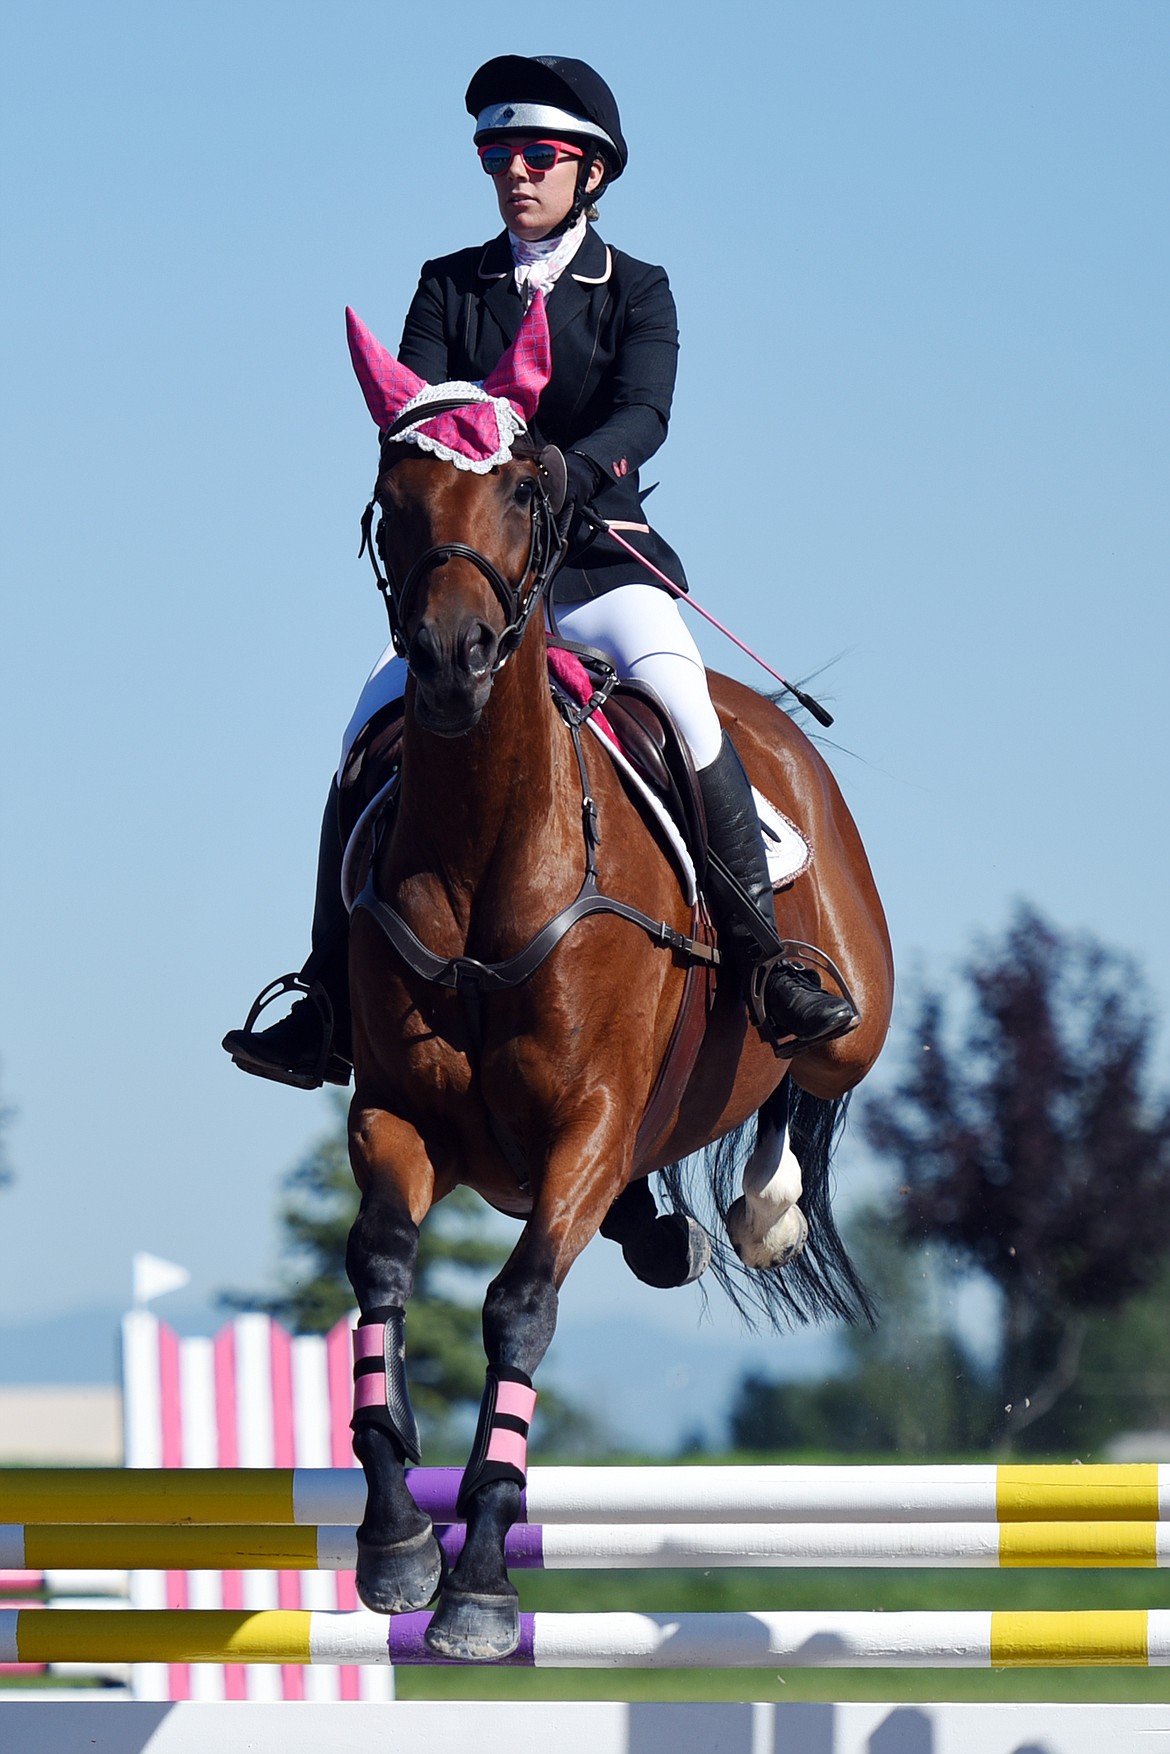 Bryanna Tomayer rides Bad Moon Rising over a jump in the Senior Open Novice B show jumping division during The Event at Rebecca Farm on Friday. (Casey Kreider/Daily Inter Lake)